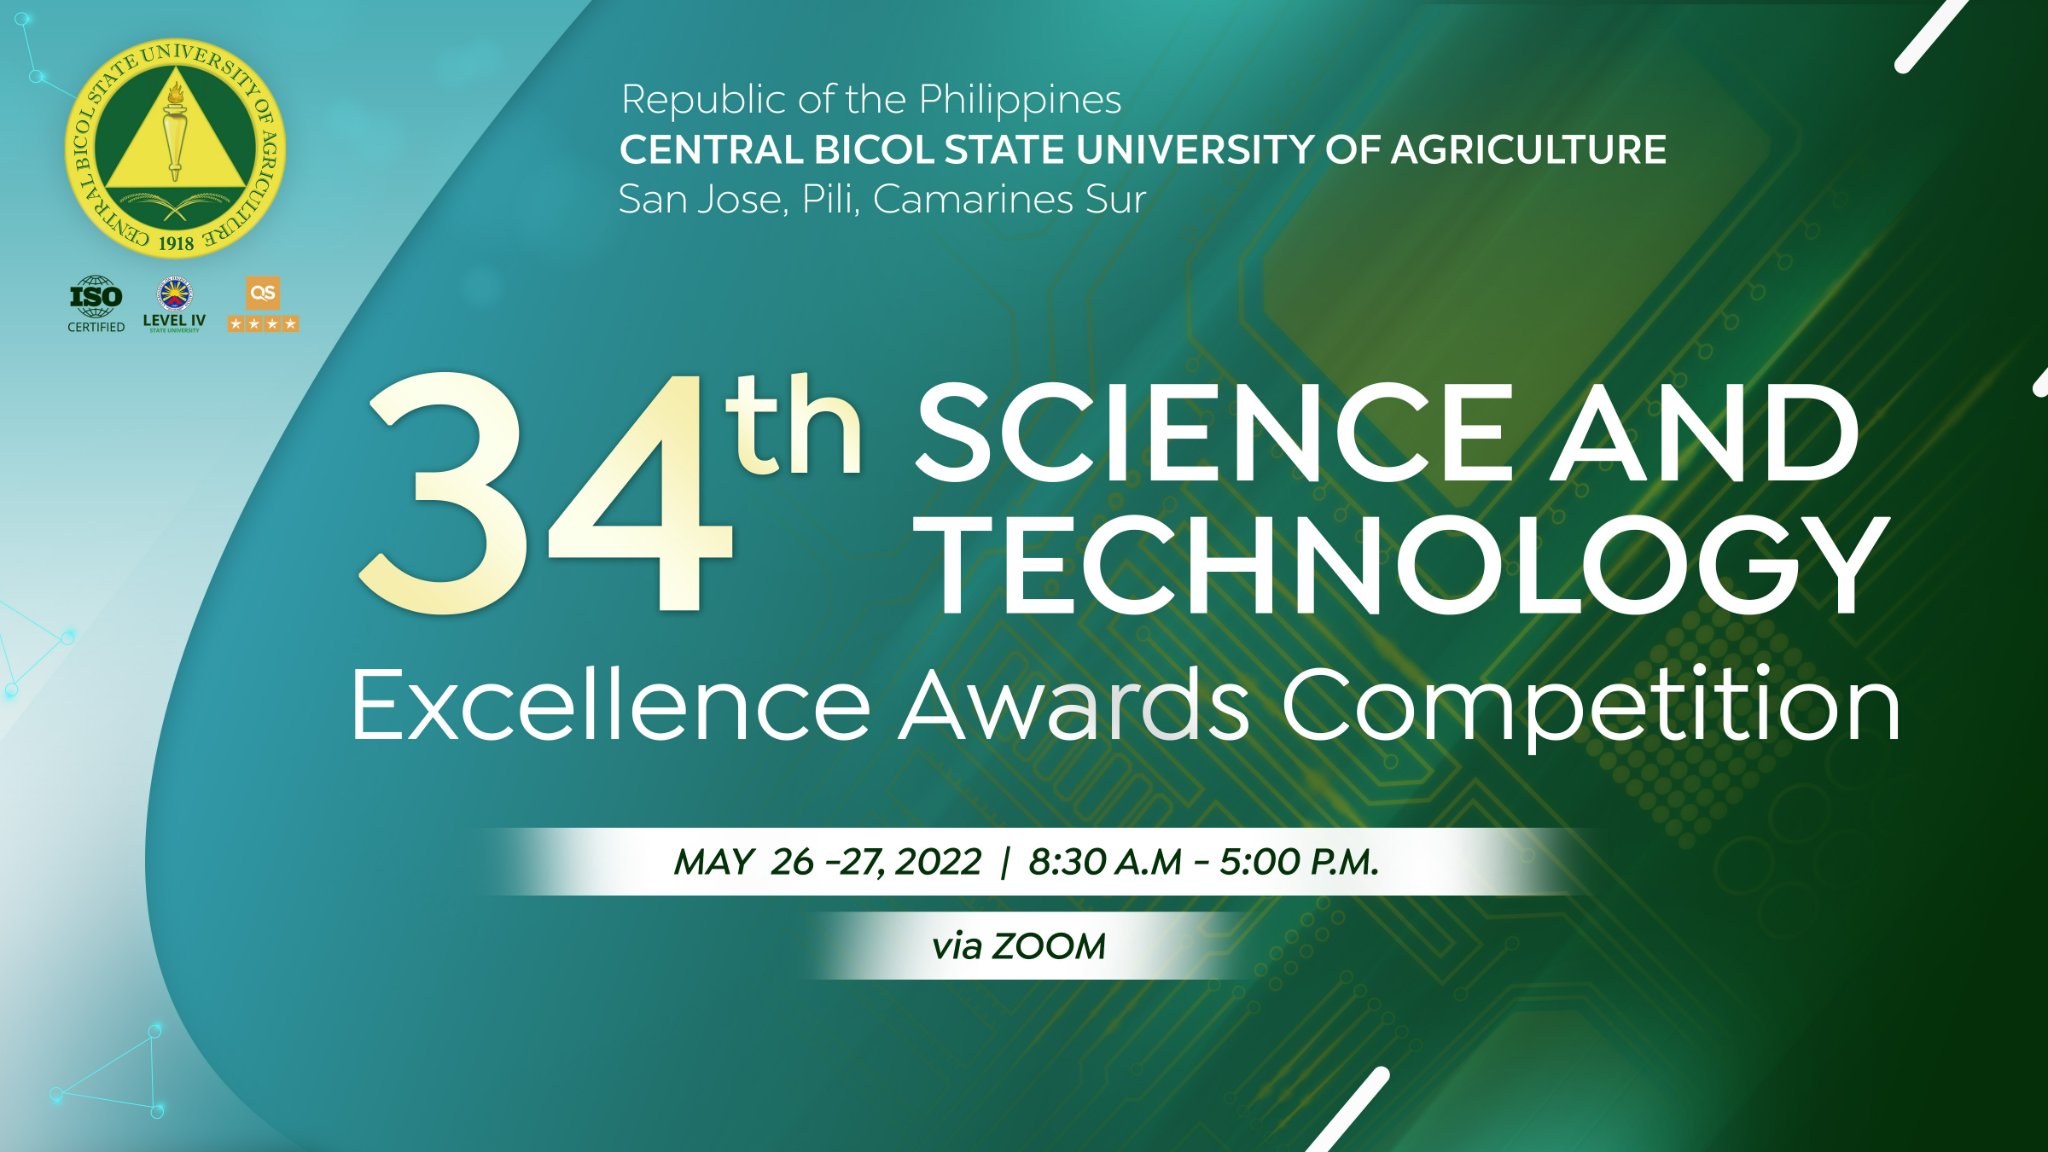 LOOK: RESEARCH DIVISION SPONSORS 34TH STEAC 2022